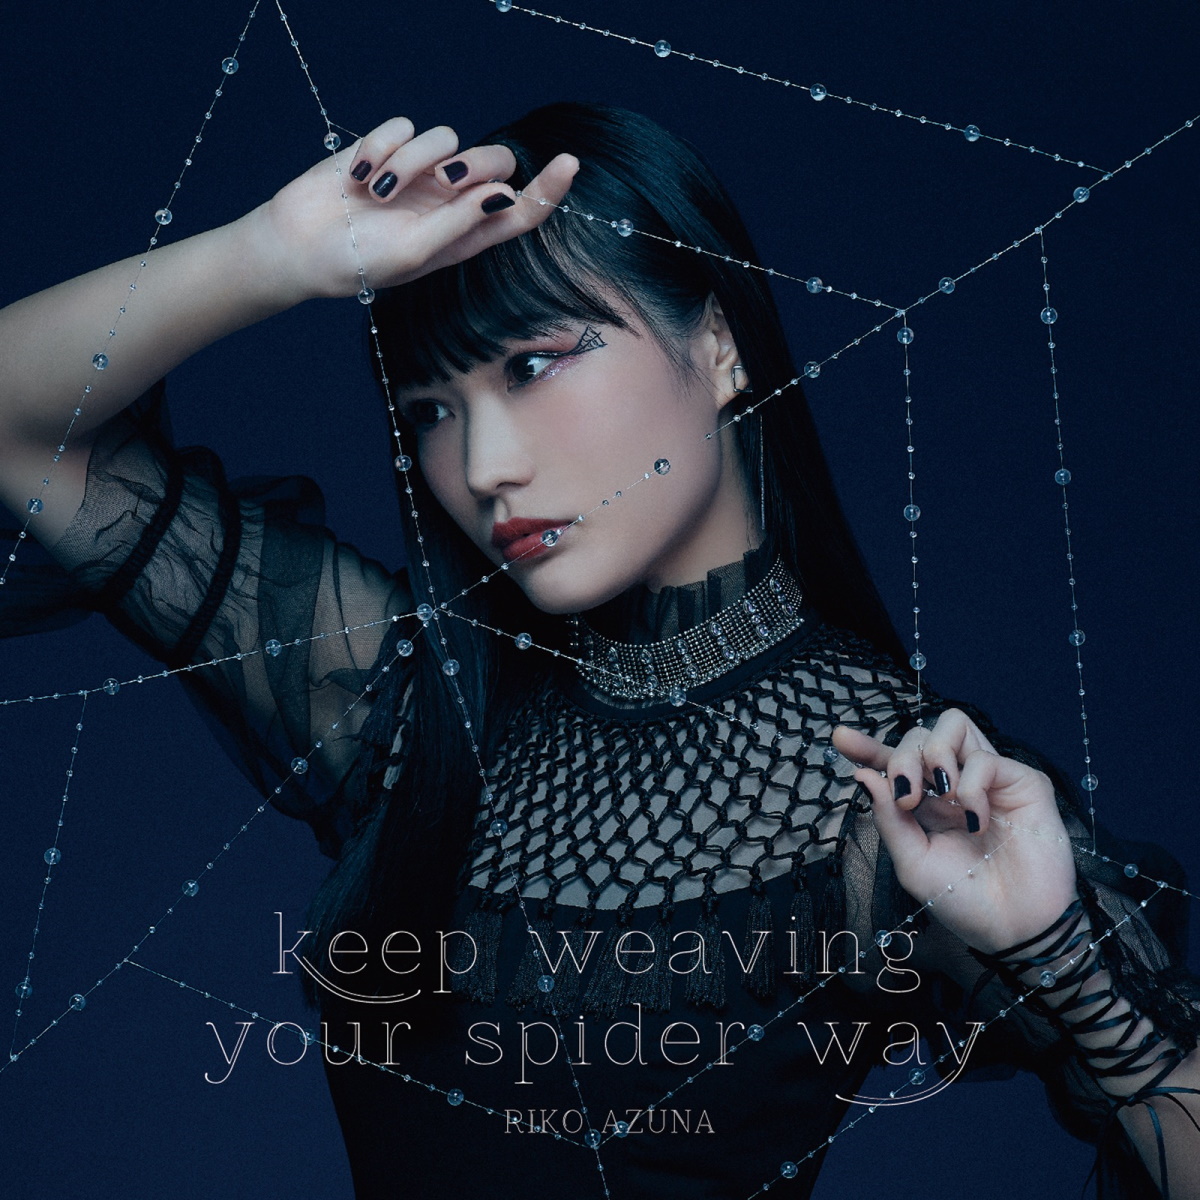 Cover for『Riko Azuna - keep weaving your spider way』from the release『keep weaving your spider way』